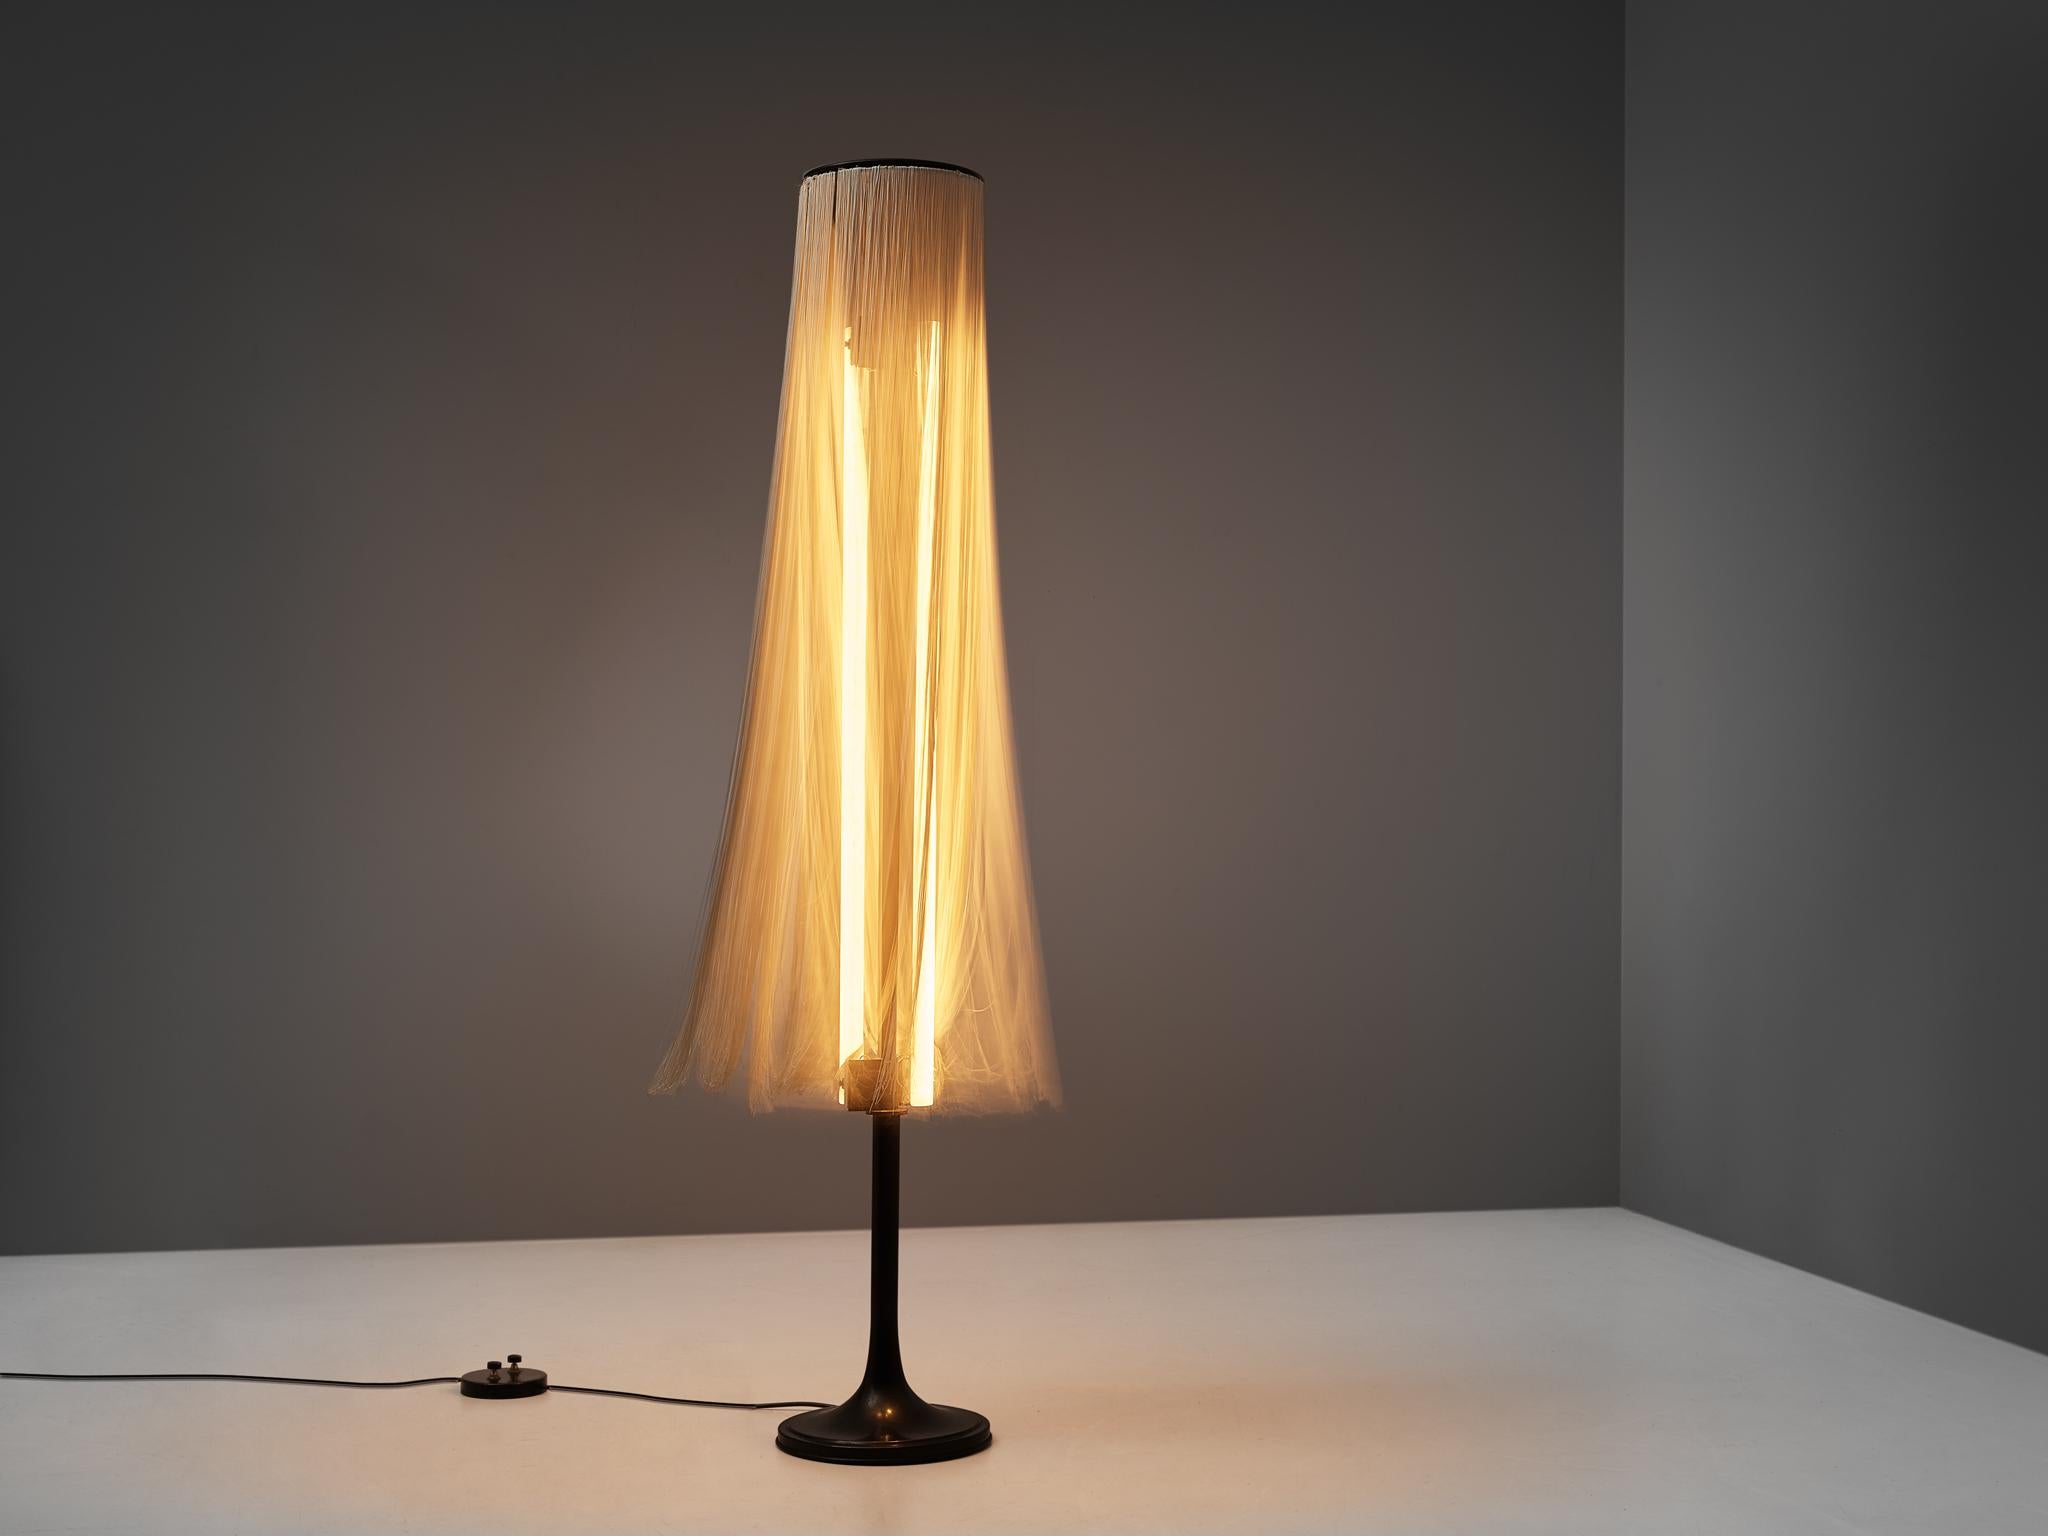 Mid-20th Century Gino Sarfatti for Arteluce Floor Lamp in Enameled Brass and Rayon